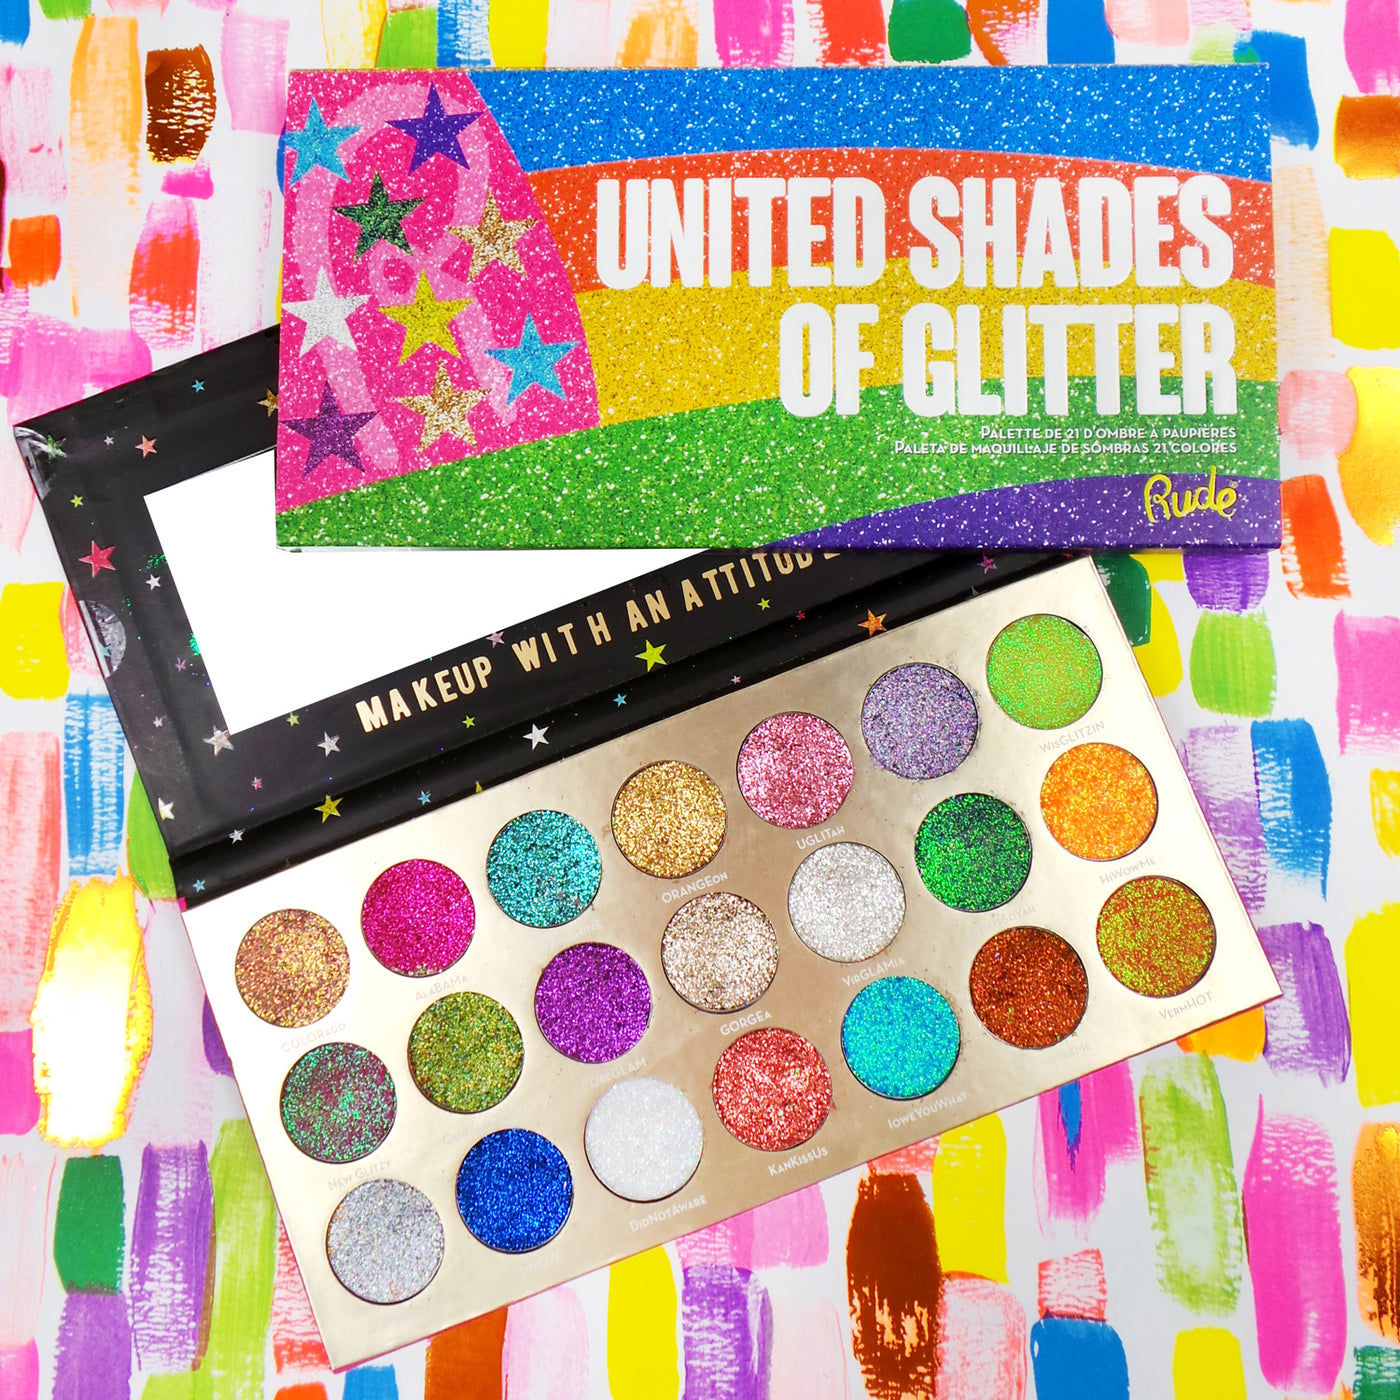 Introducing All That Glitters - 101 Different Shades Of Glitter